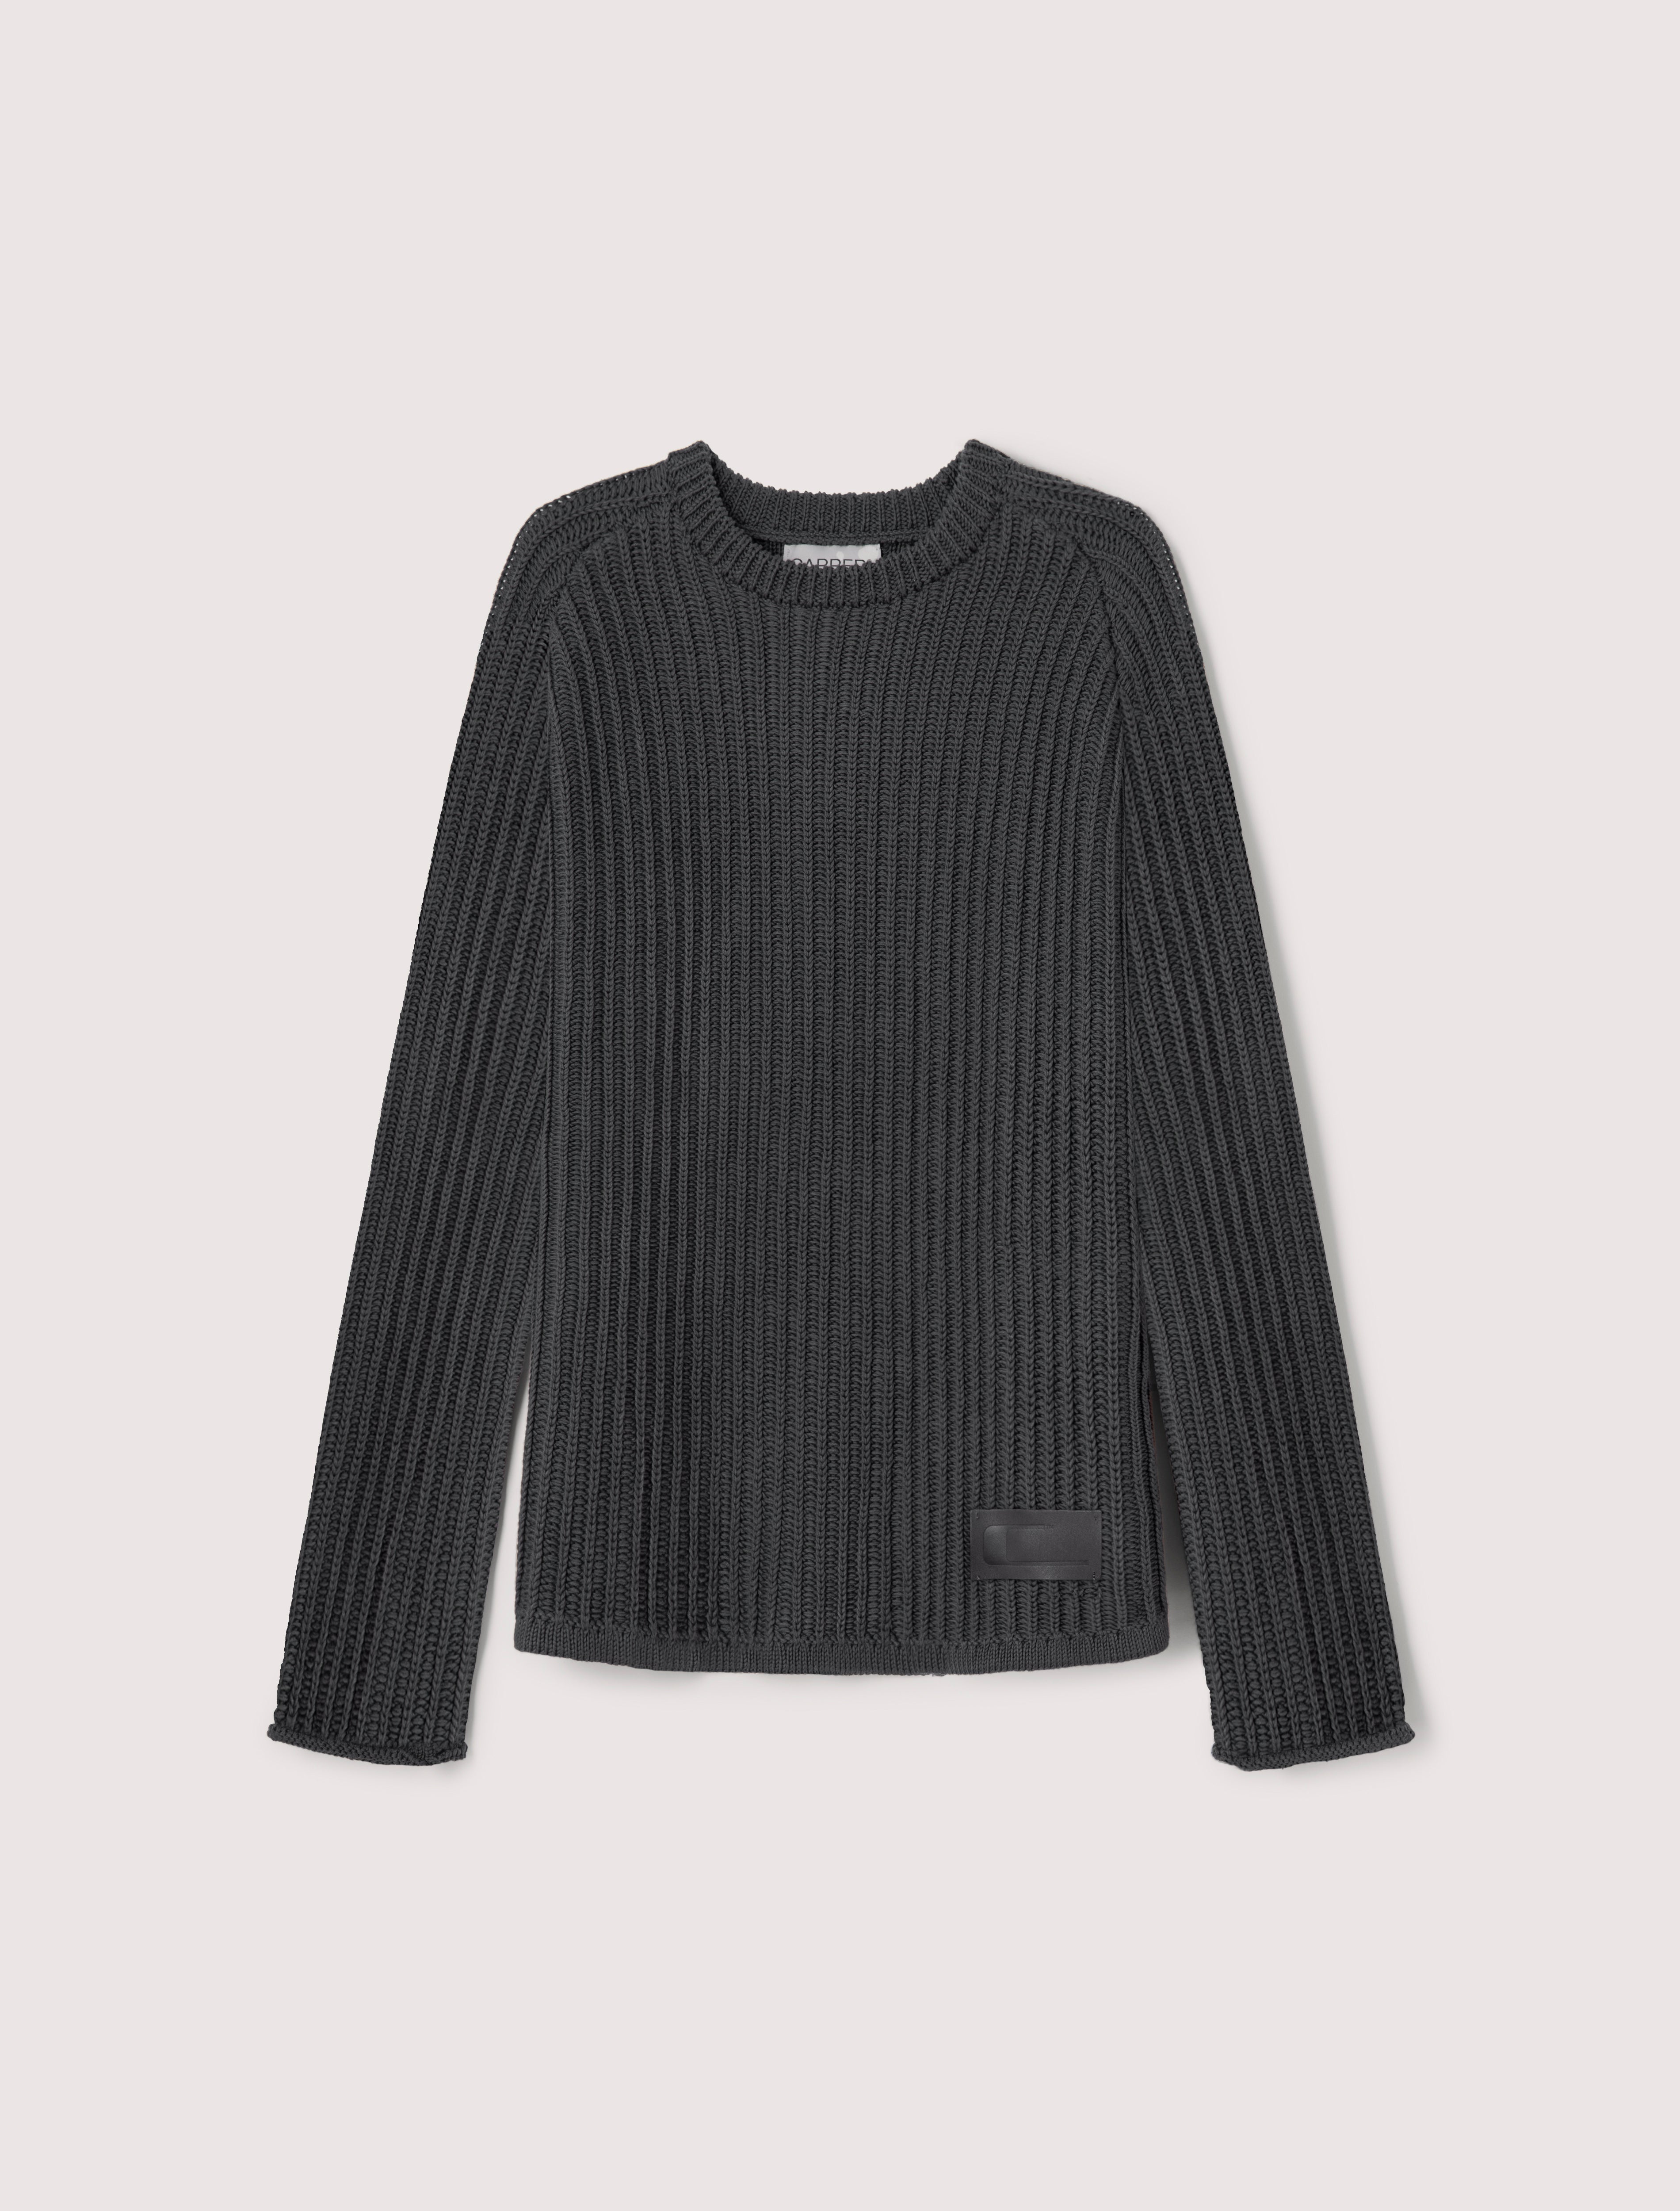 CARRER_ALBA KNITTED CREW NECK IN GREY